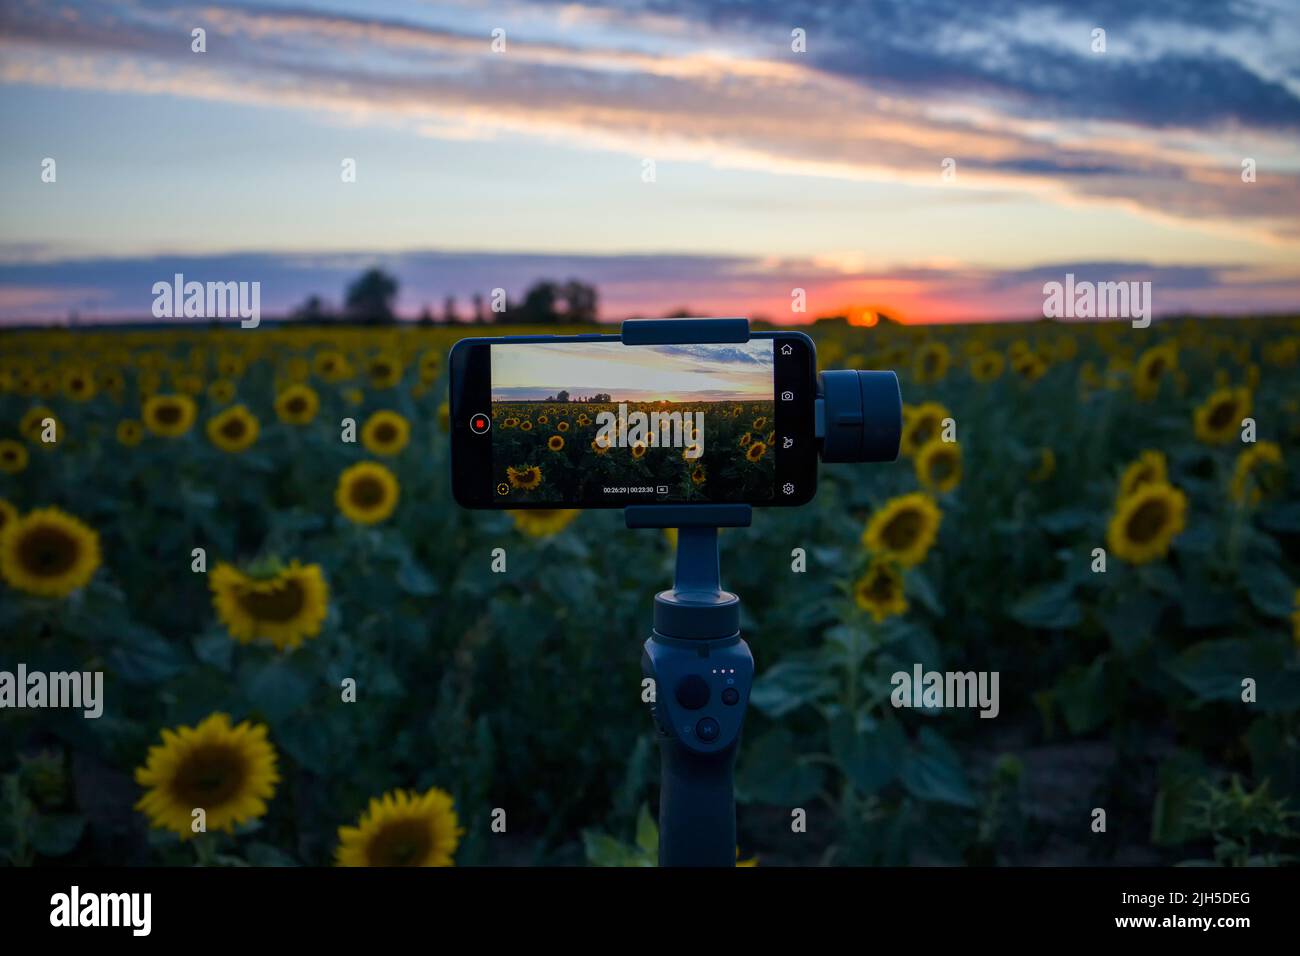 Steadicam for phone that shoots sunflowers Stock Photo